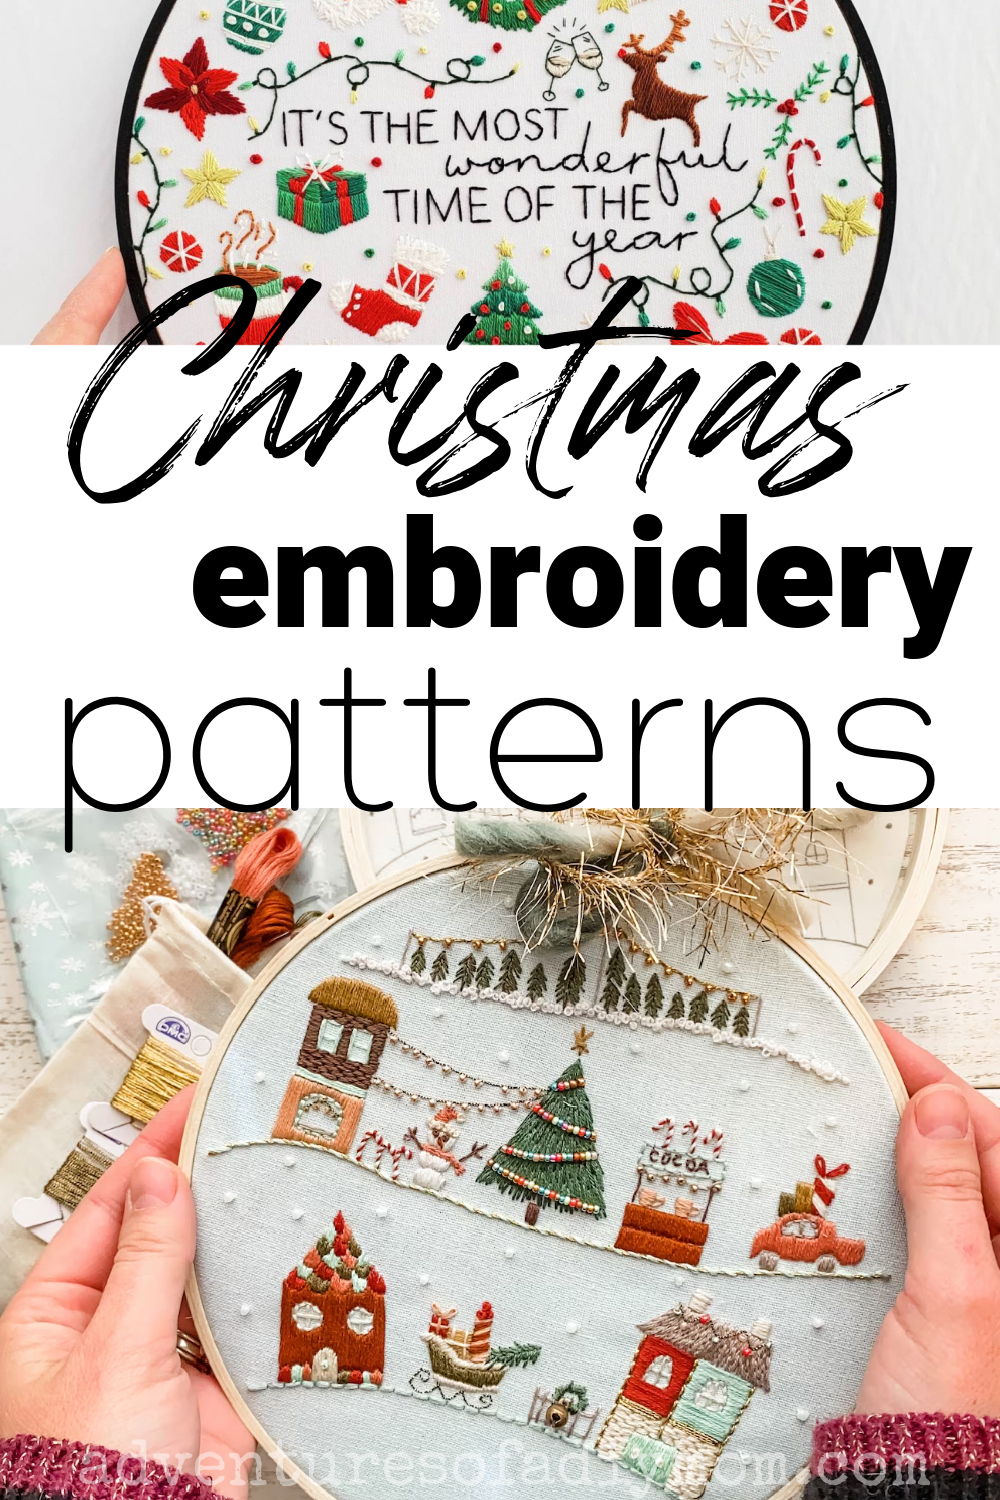 Embroidery Bundle, Floral Embroidery Patterns PDF, Winter Embroidery  Design, Fall Home Decor, DIY Gift for Friend, Stitching Patterns 